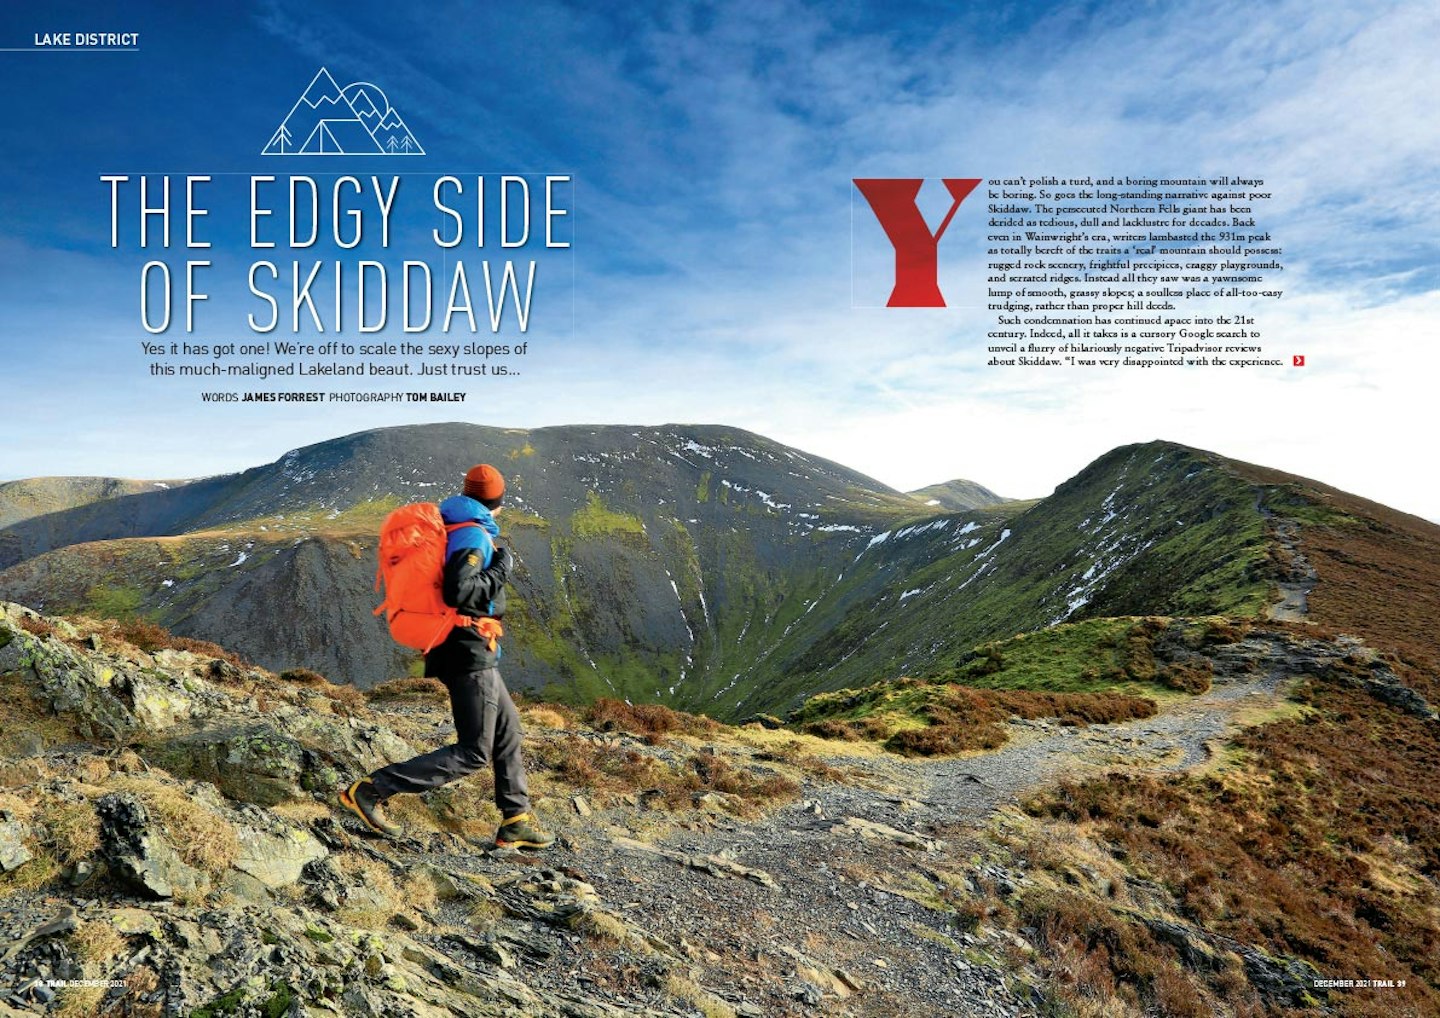 The edgy side of Skiddaw